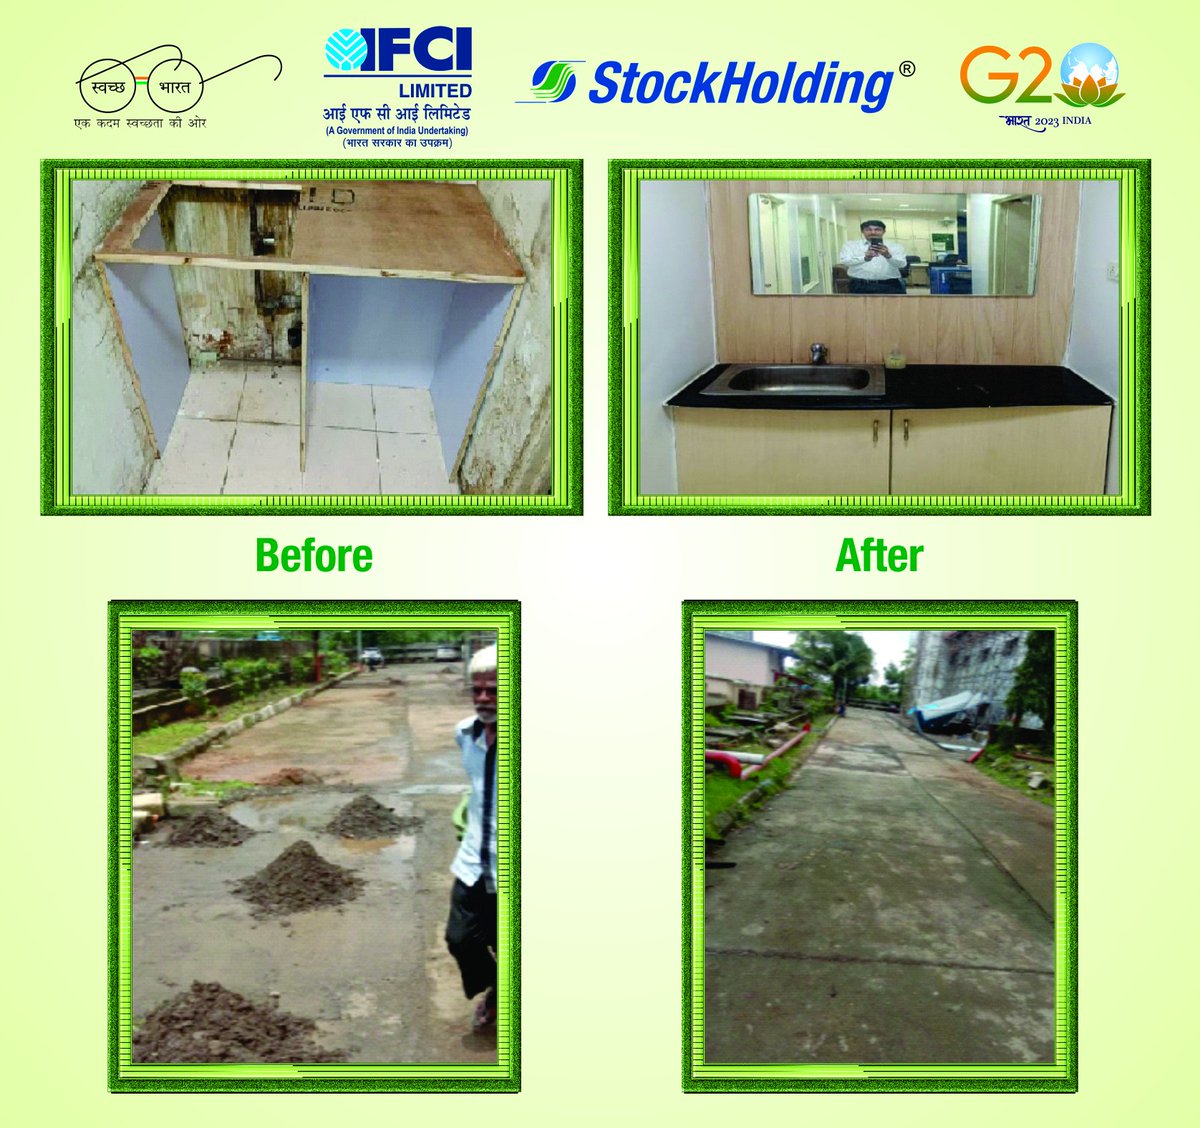 IFCI’s subsidiary StockHolding Corporation’s participation in #SpecialCampaign3 at the Lucknow branch office. #SwachhBharat #GarbageFreeIndia #SHS2023 @DFS_India @SwachhBharatGov @swachhbharat @PMOIndia